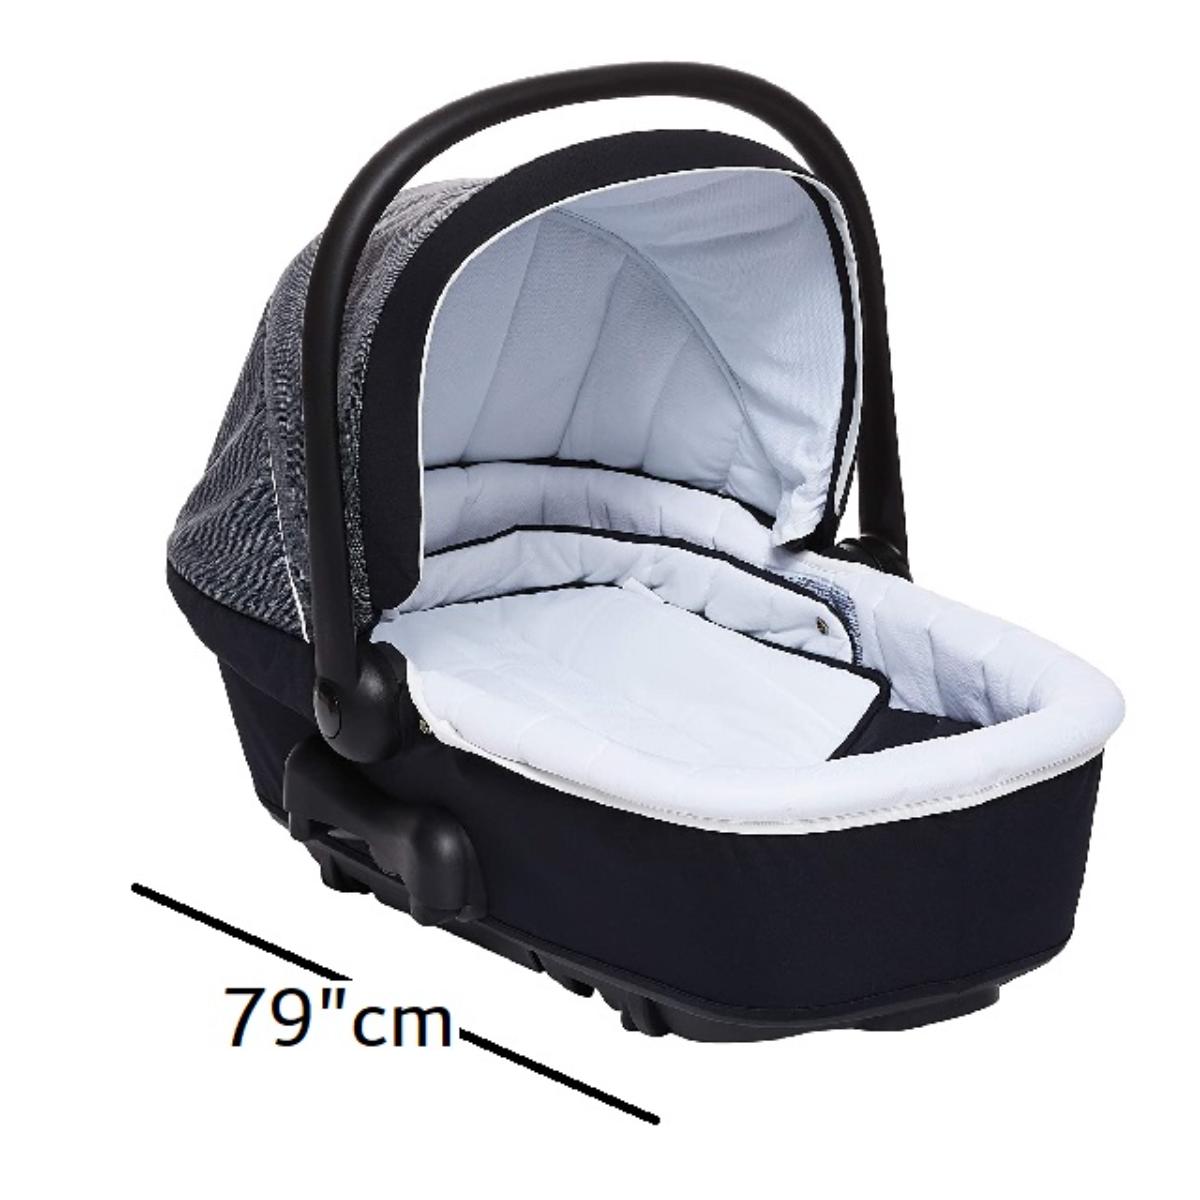 Cam - Coccola Baby infant Carrycot travel full body support, Beside sleeper, Bassinet, Portable bed, brethable cotton, Pressure protection, outdoor, picnic and travel - Blue